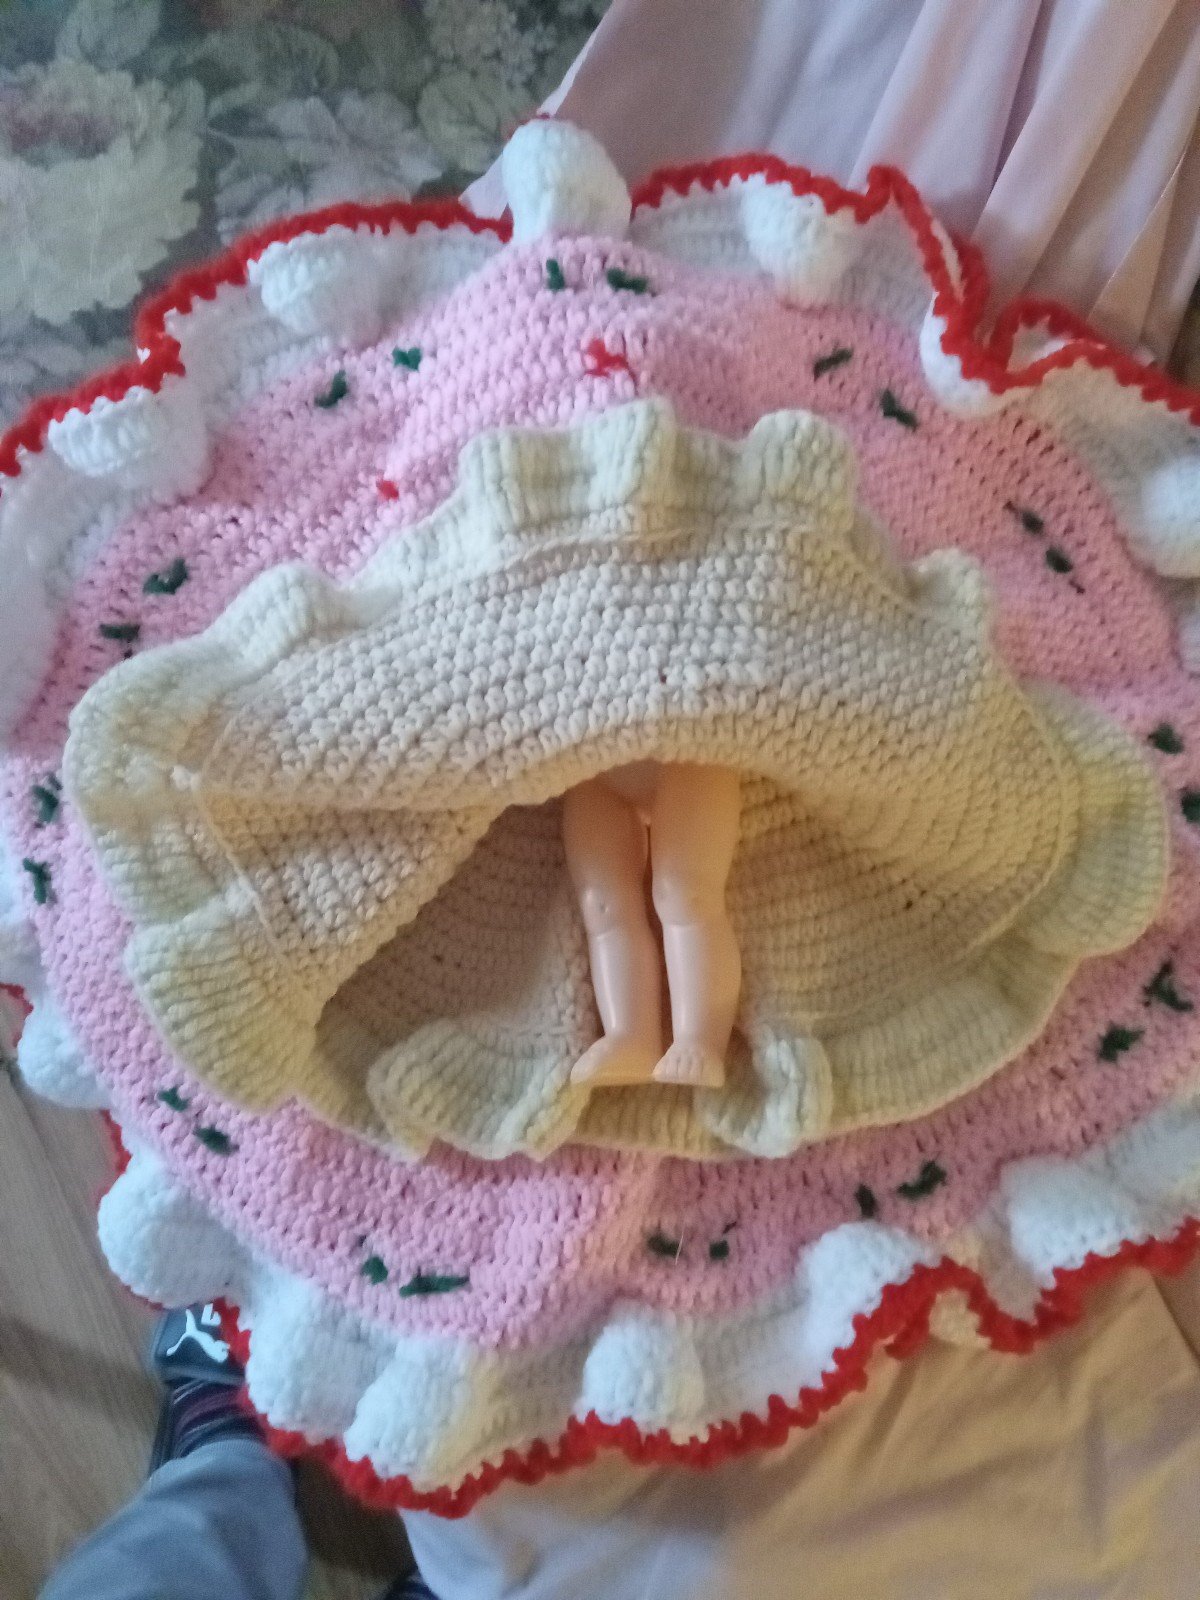 Crocheted  bed topper doll FZyf3Qtra